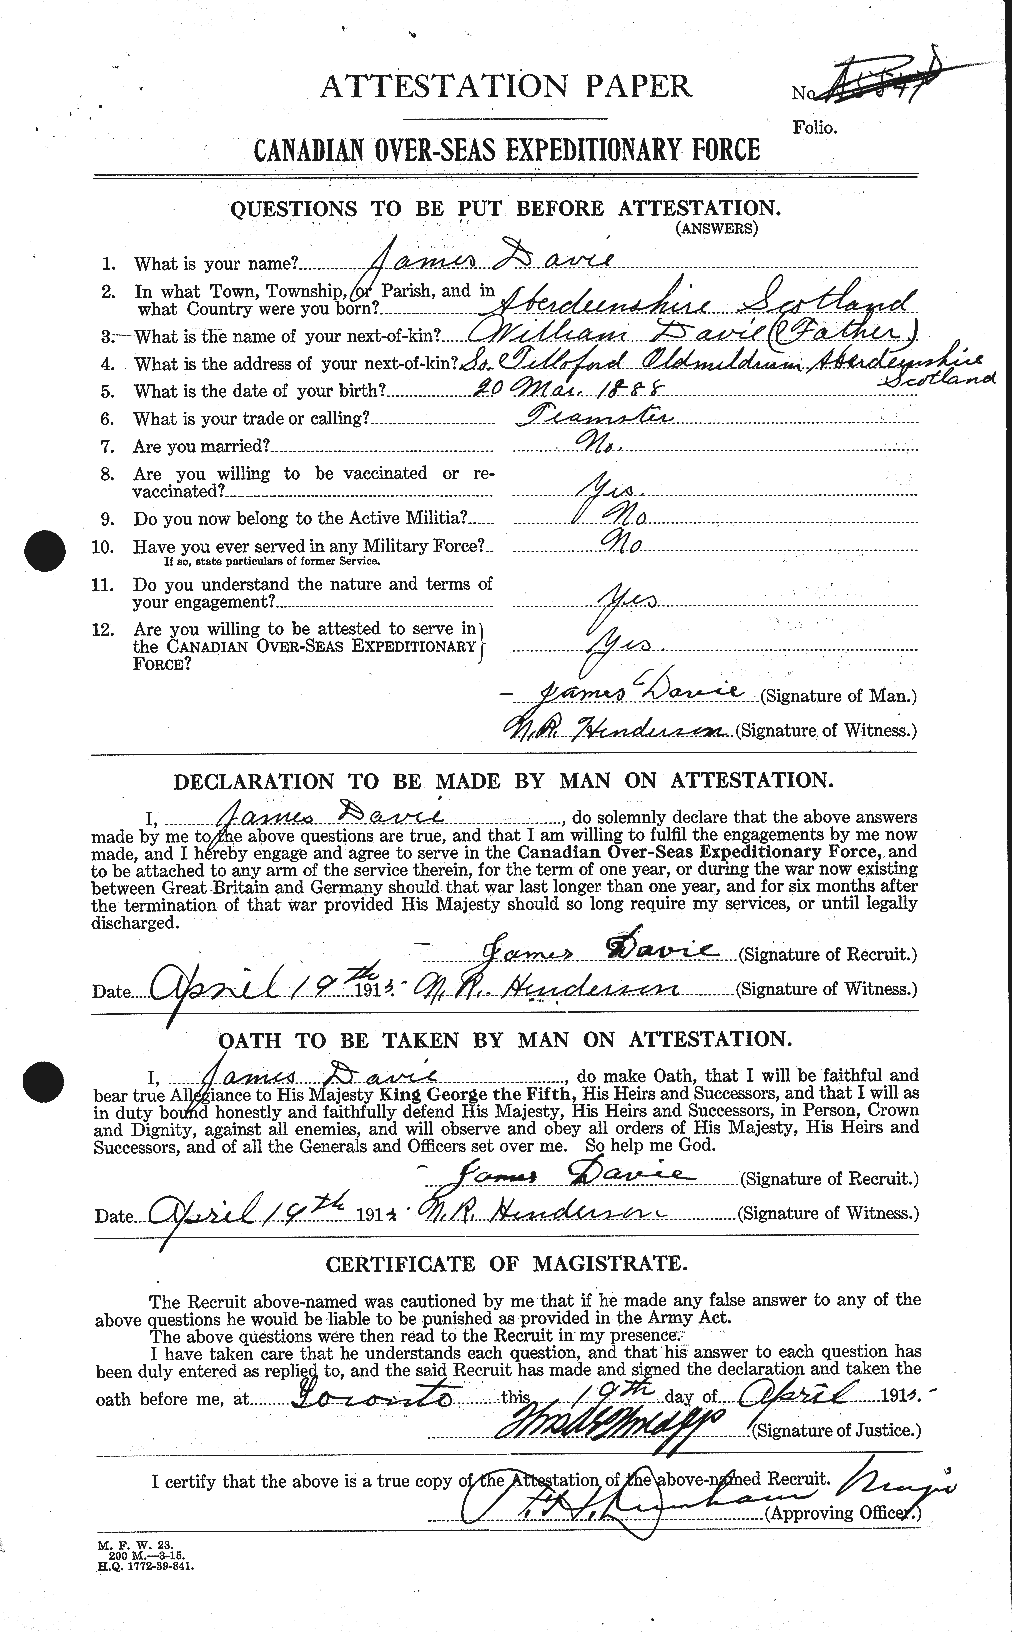 Personnel Records of the First World War - CEF 278829a